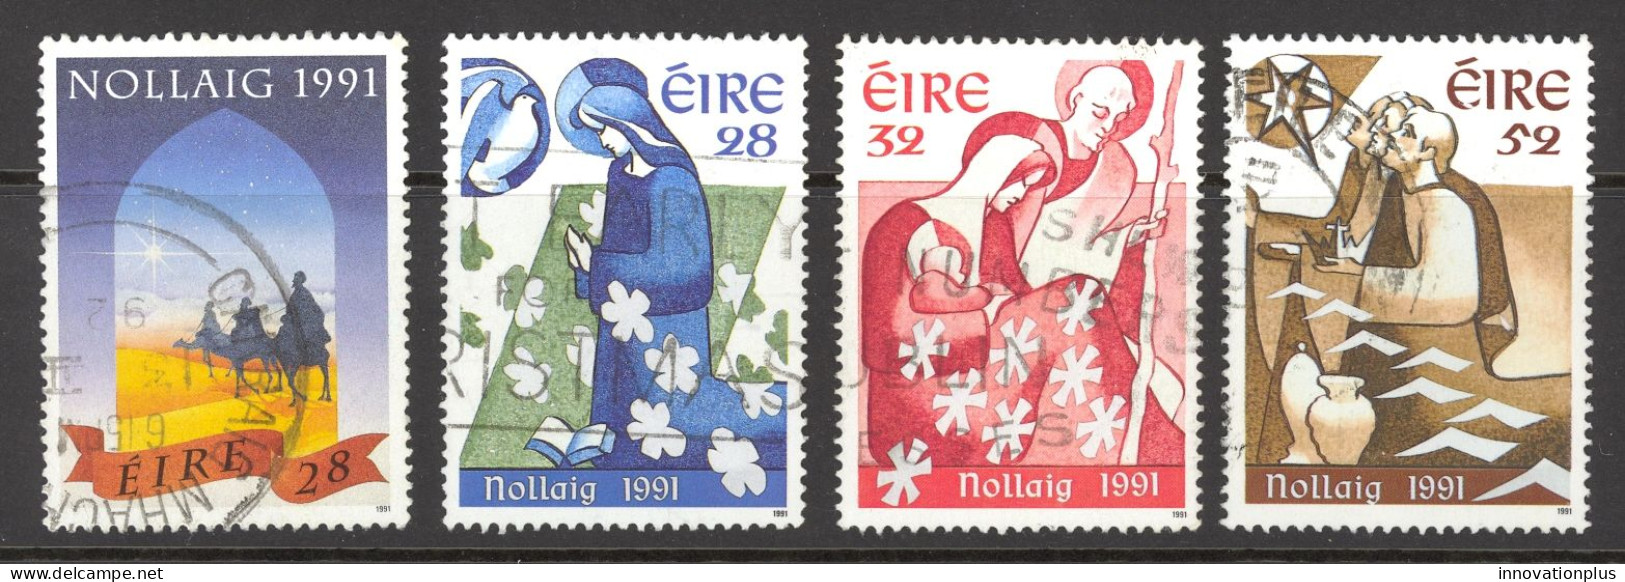 Ireland Sc# 848-851 Used 1991 Christmas - Used Stamps